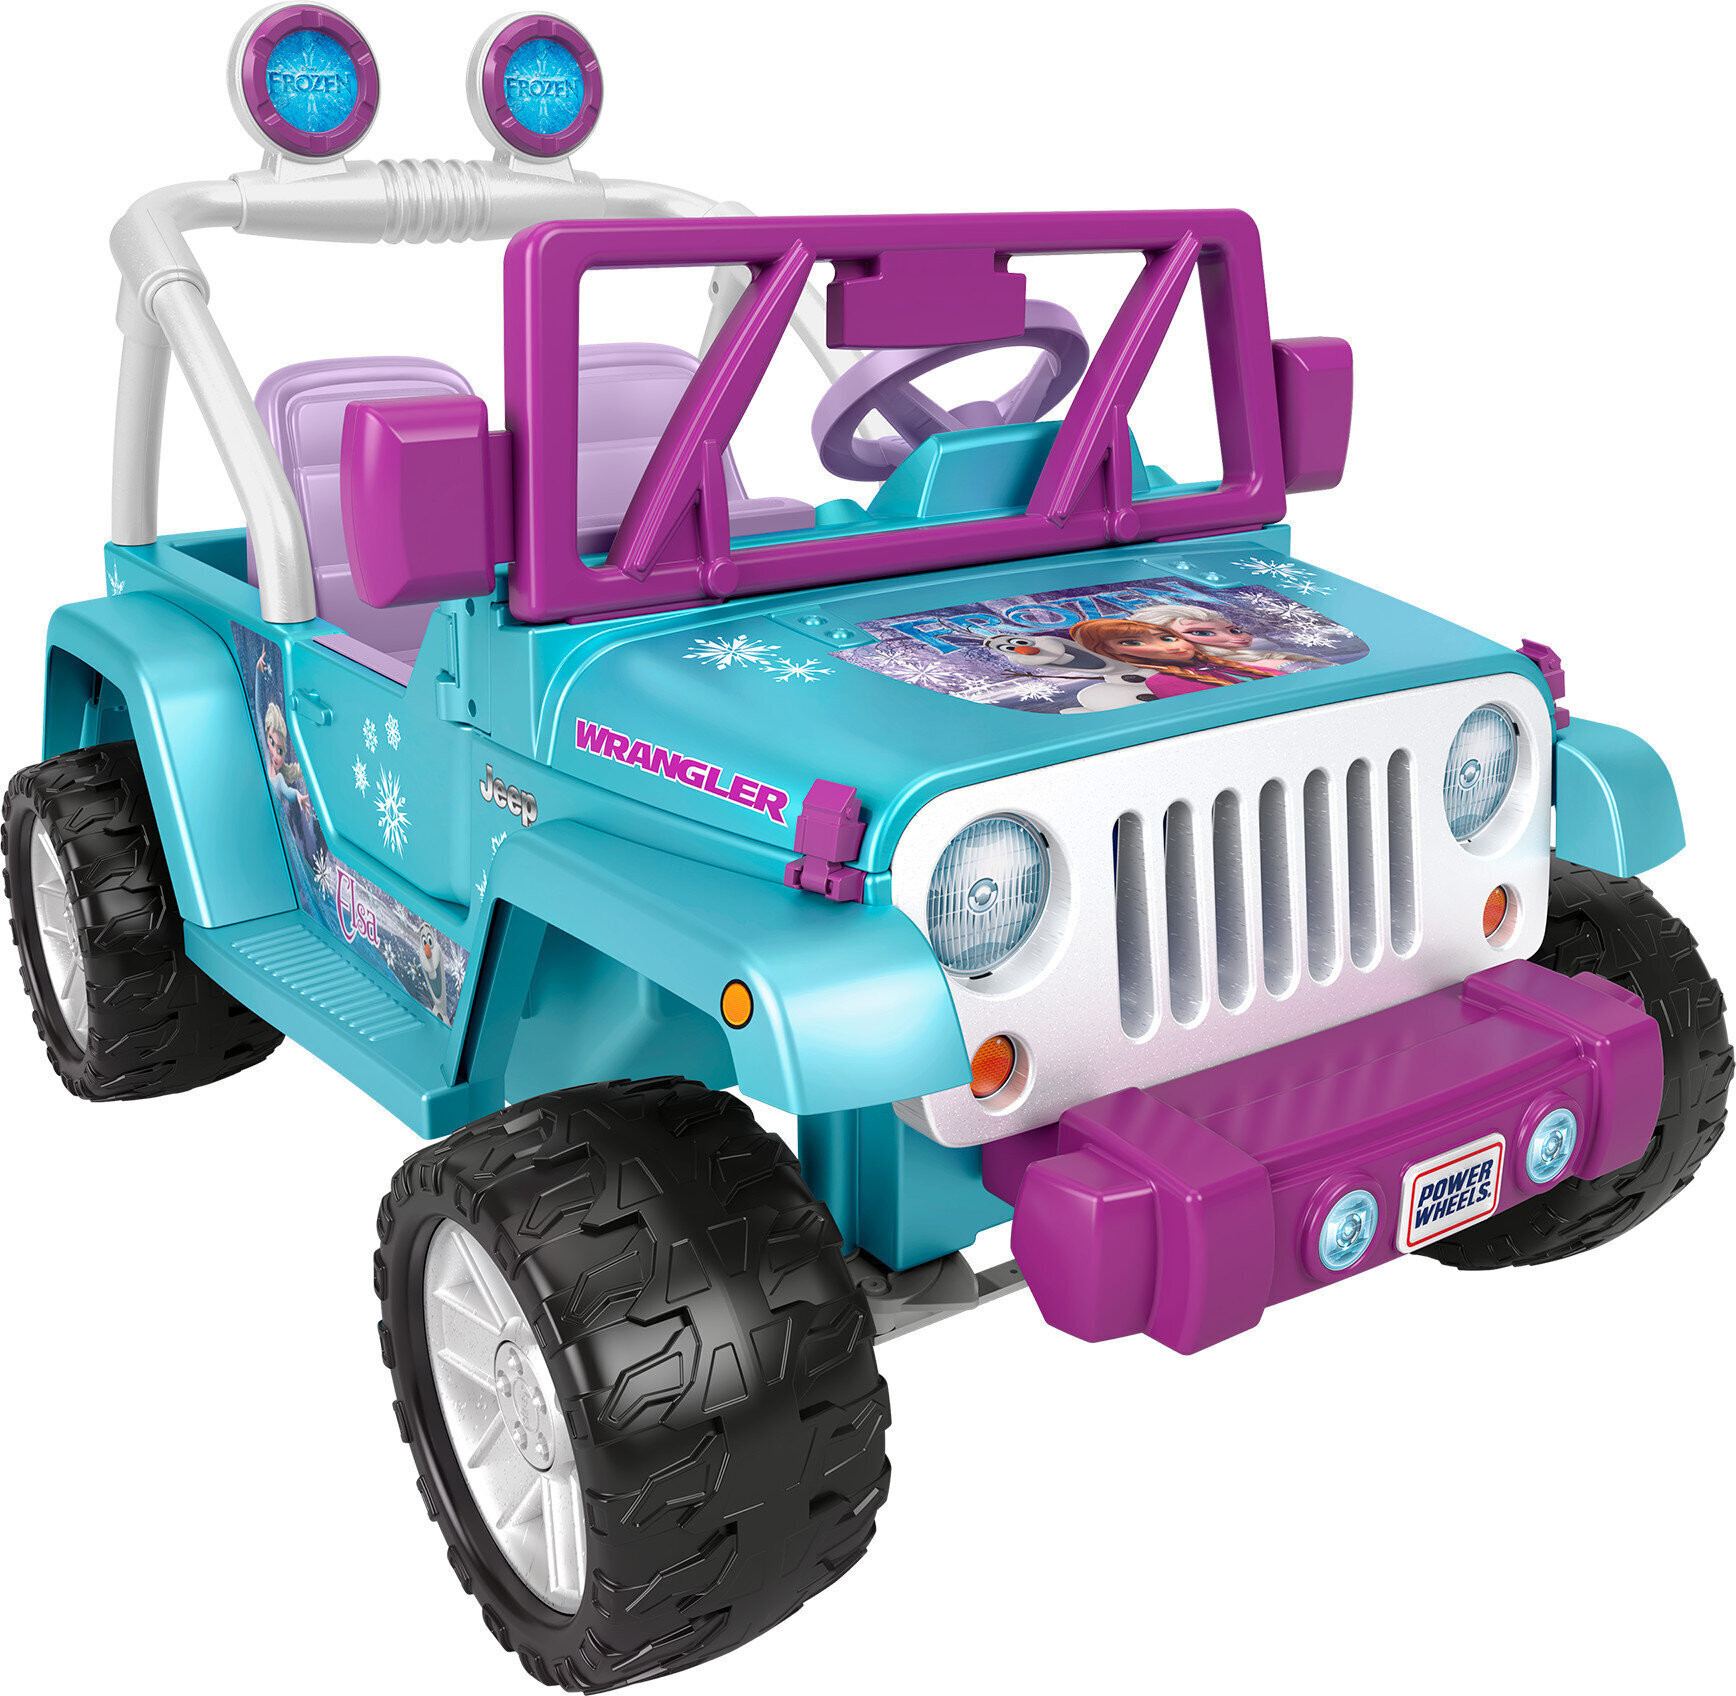 12V Power Wheels Disney Frozen Jeep Wrangler Battery-Powered Ride-On Toy Vehicle with Music & Sounds, for a Child Ages 3-7 - image 1 of 7